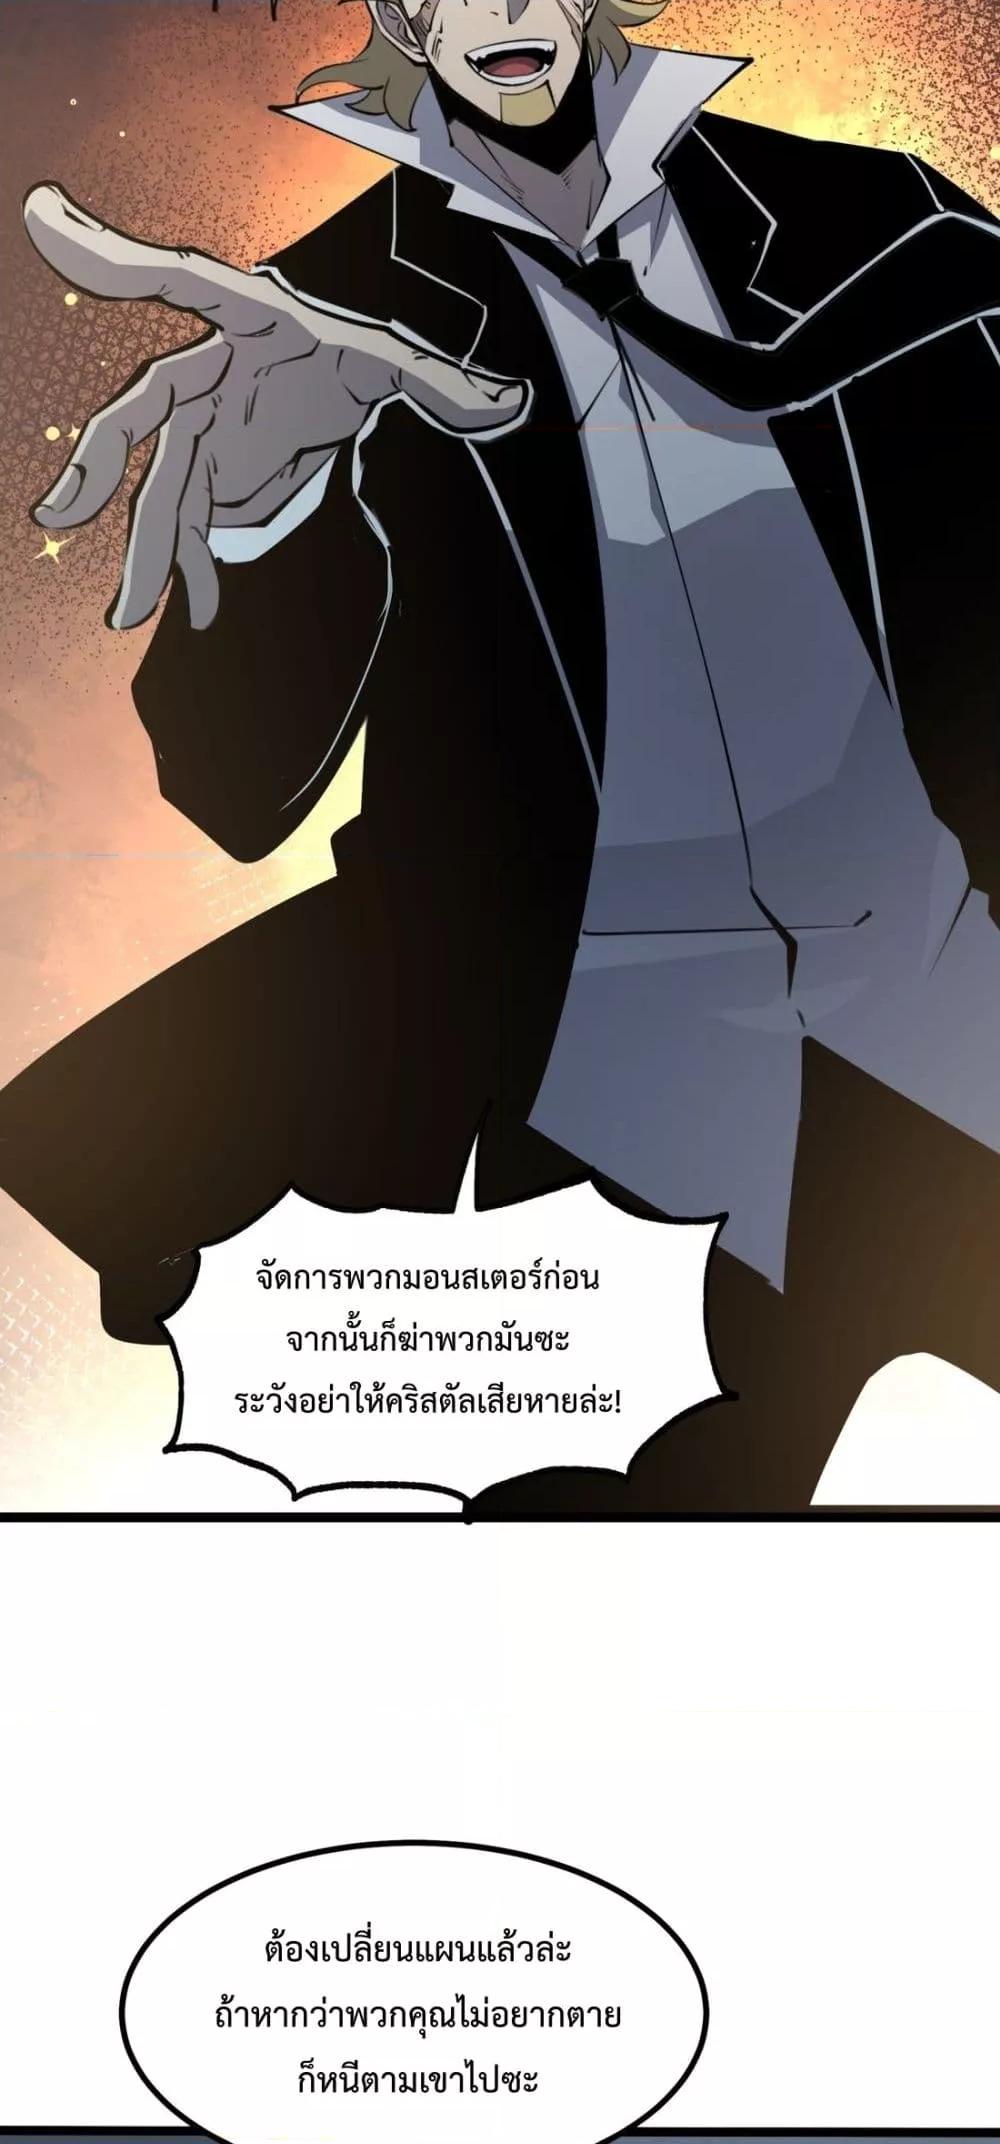 I Became The King by Scavenging โ€“ เนเธเนเธฅเน เน€เธฅเน€เธงเนเธฅเธฅเธฃเธดเนเธ เธ•เธญเธเธ—เธตเน 16 (20)